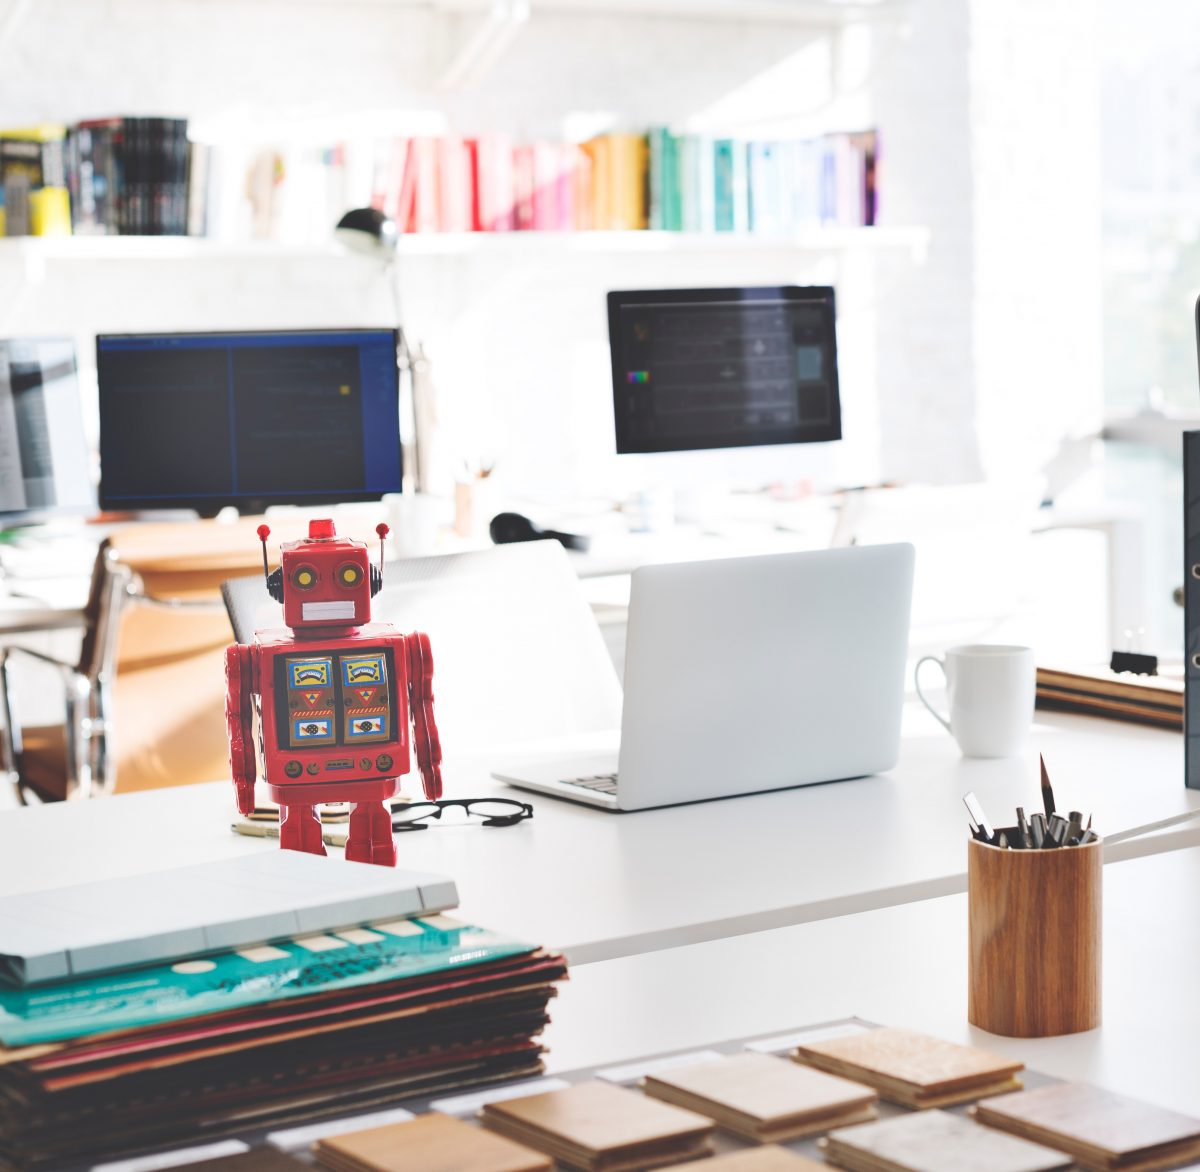 Work Environment Automation: How AI Affects Employee Performance